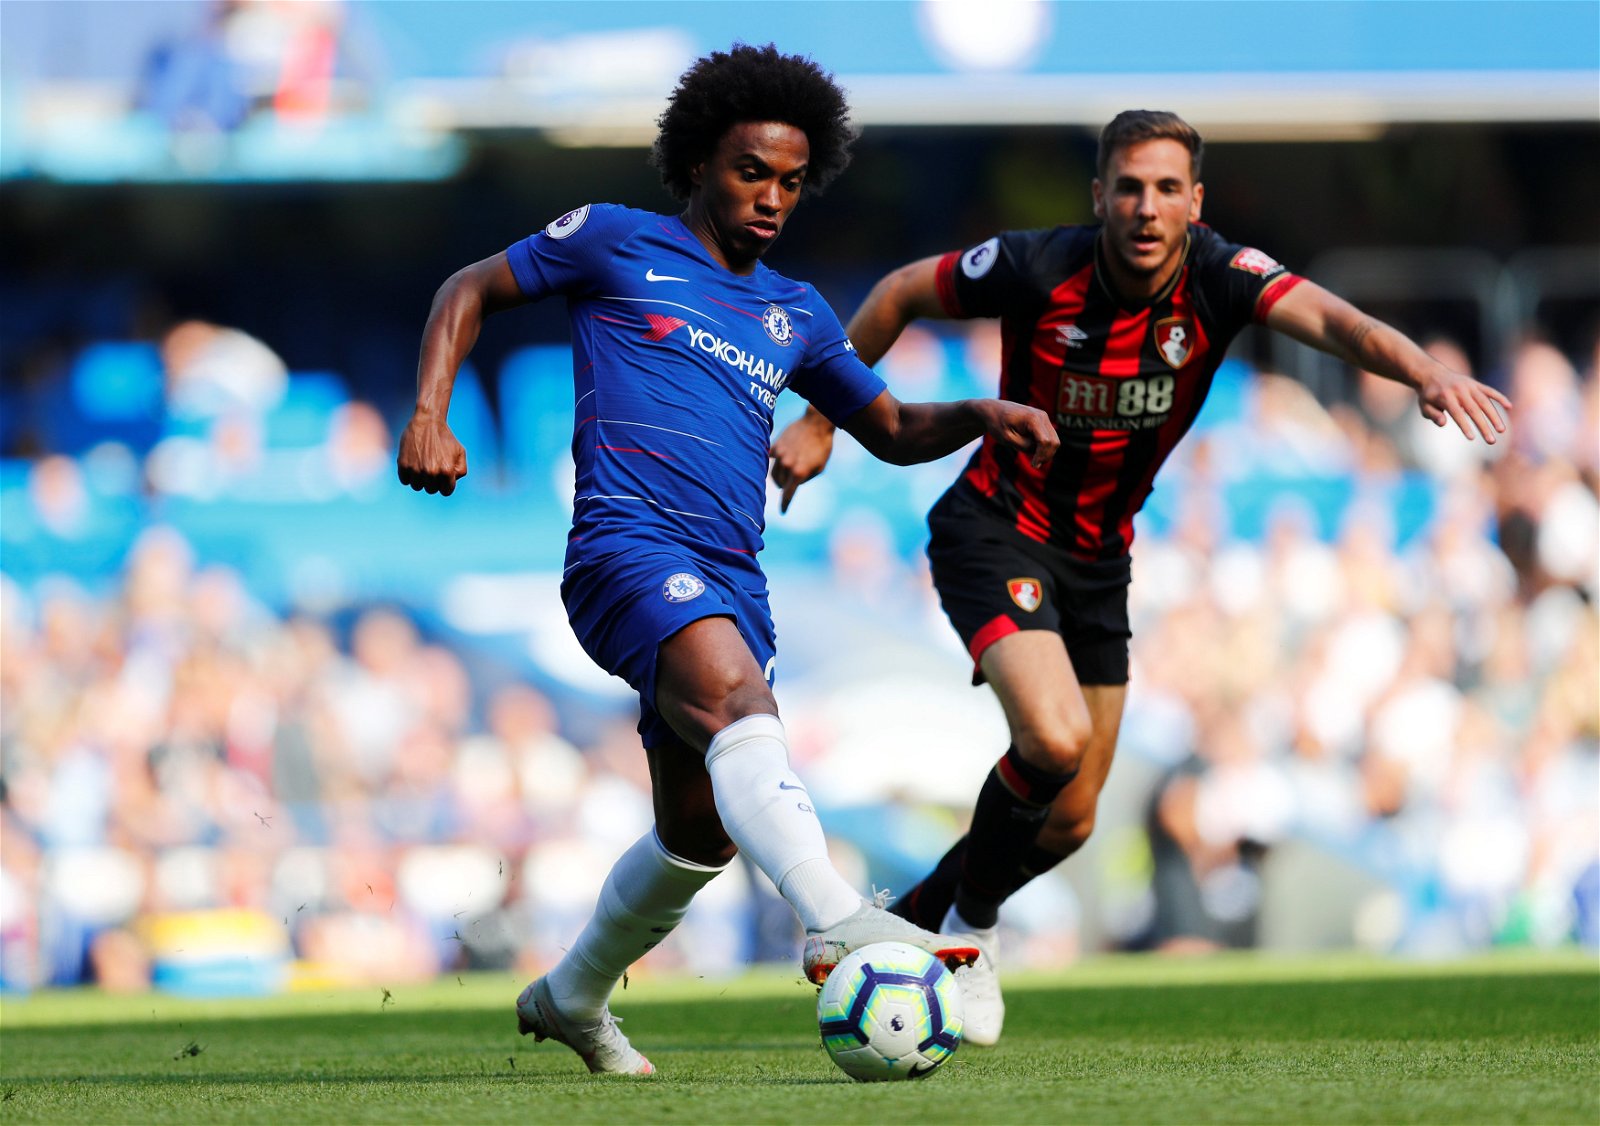 Willian says the difference between Brazilian and European football